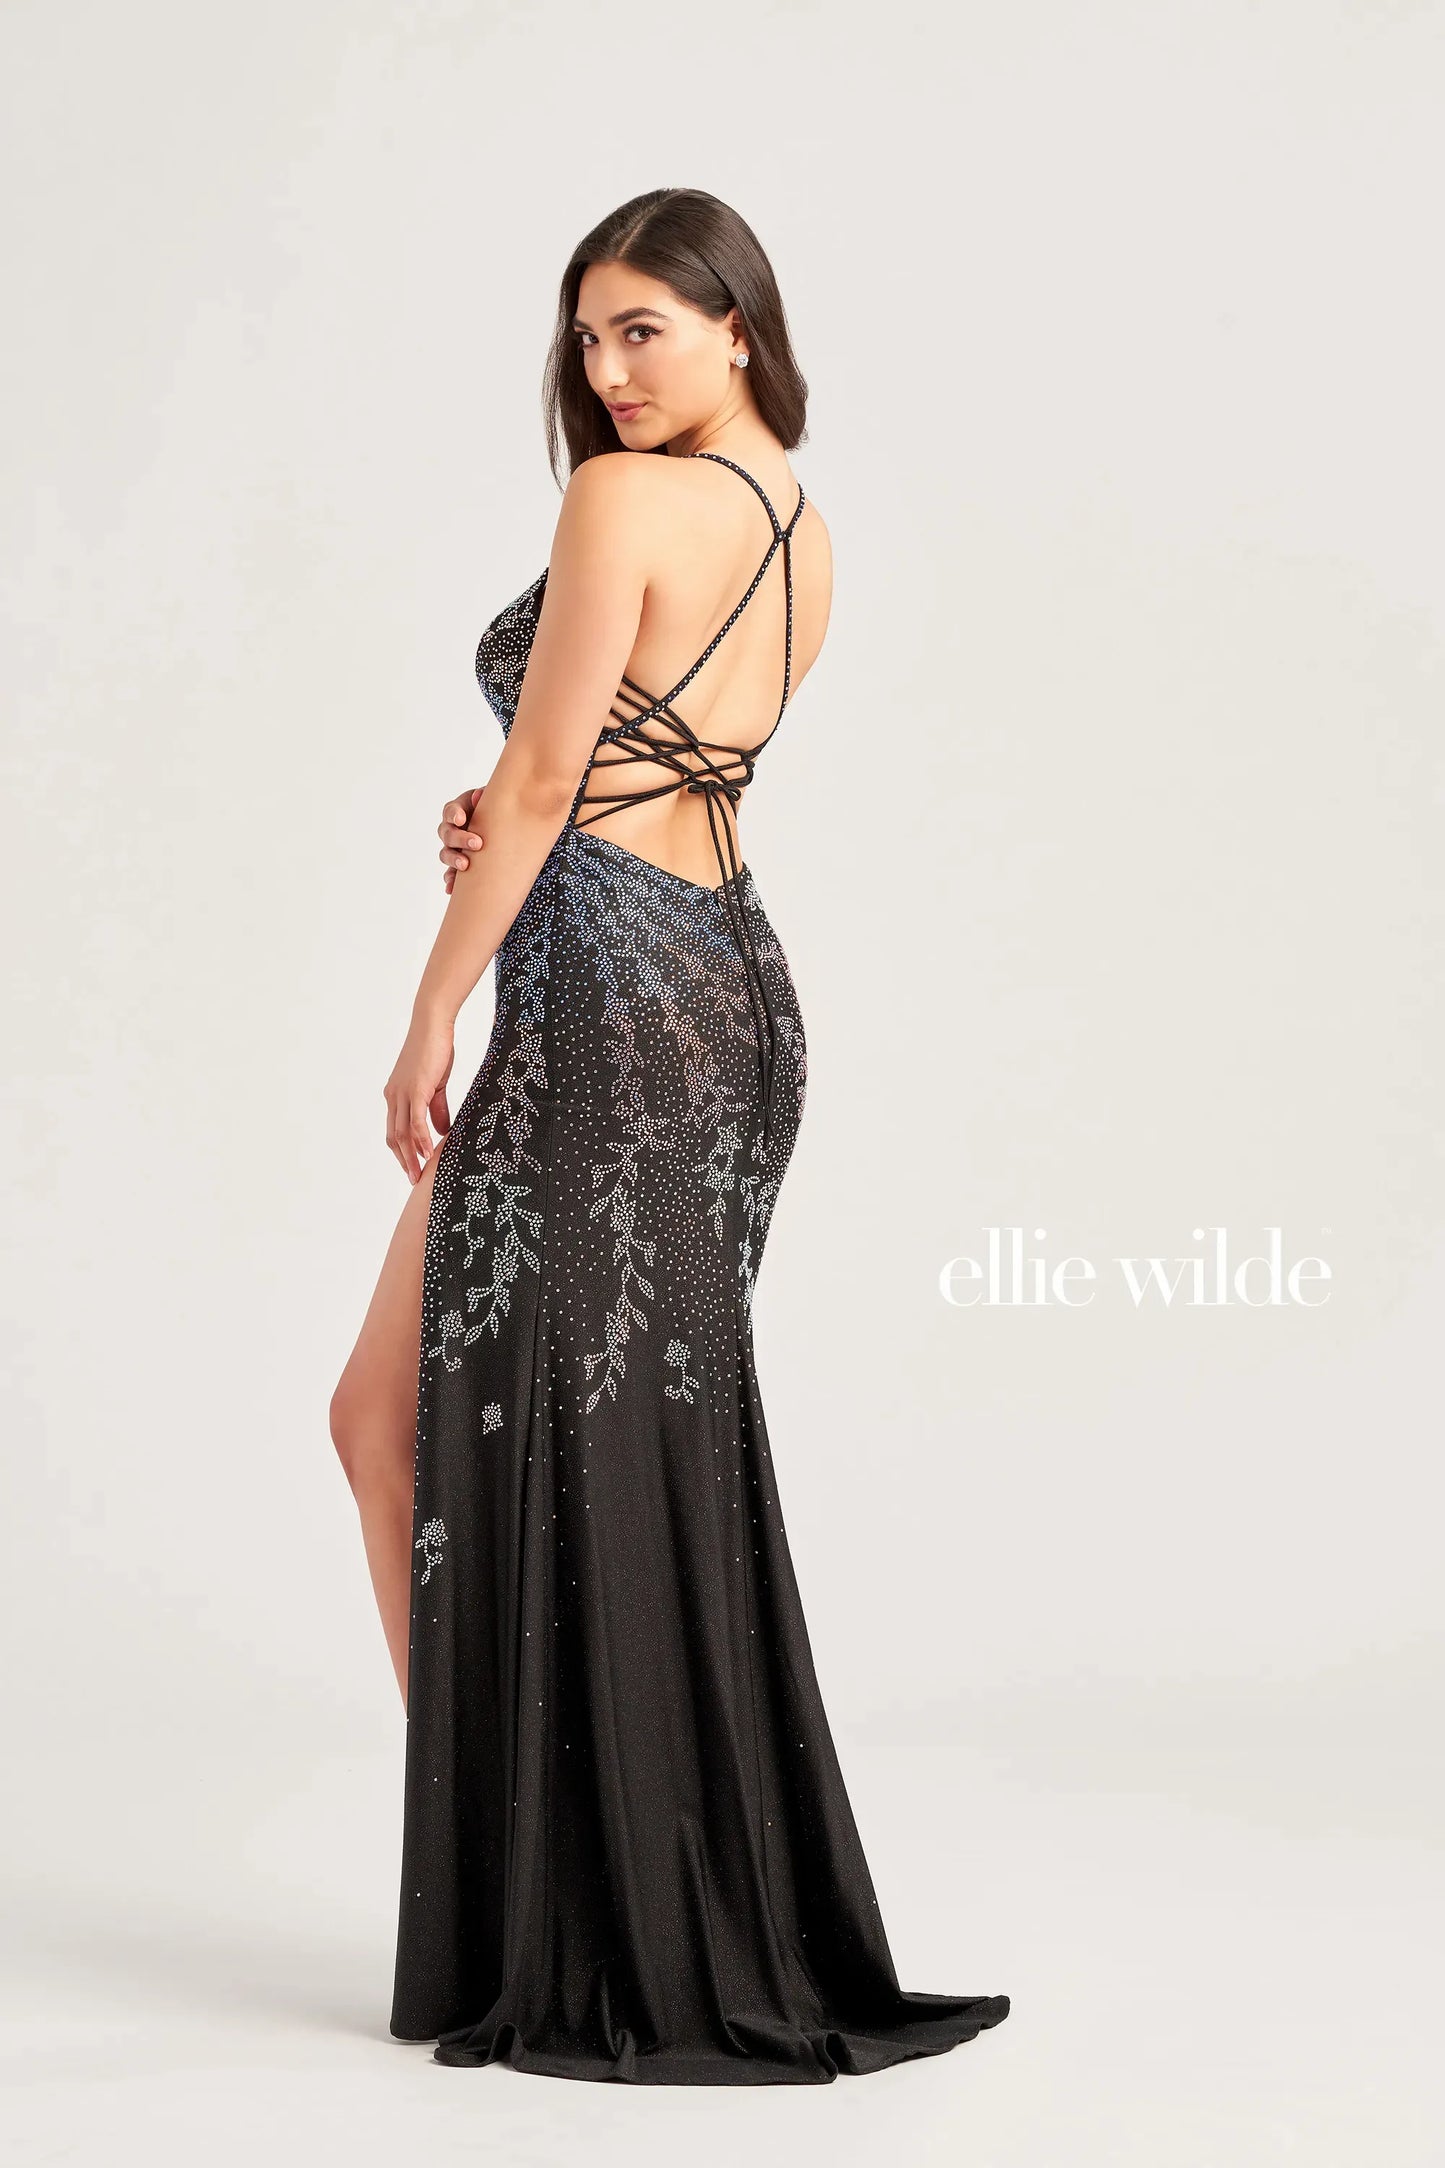 Expertly crafted, the Ellie Wilde EW35061 is a stunning backless corset prom dress. The fitted silhouette and shimmer jersey fabric create a flattering look, while the crystal embellishments and V-neckline add a touch of glamour. The high slit adds a daring element to this elegant gown.  Sizes: 0-16  Colors: EMERALD, ROYAL BLUE, BLACK GALAXY